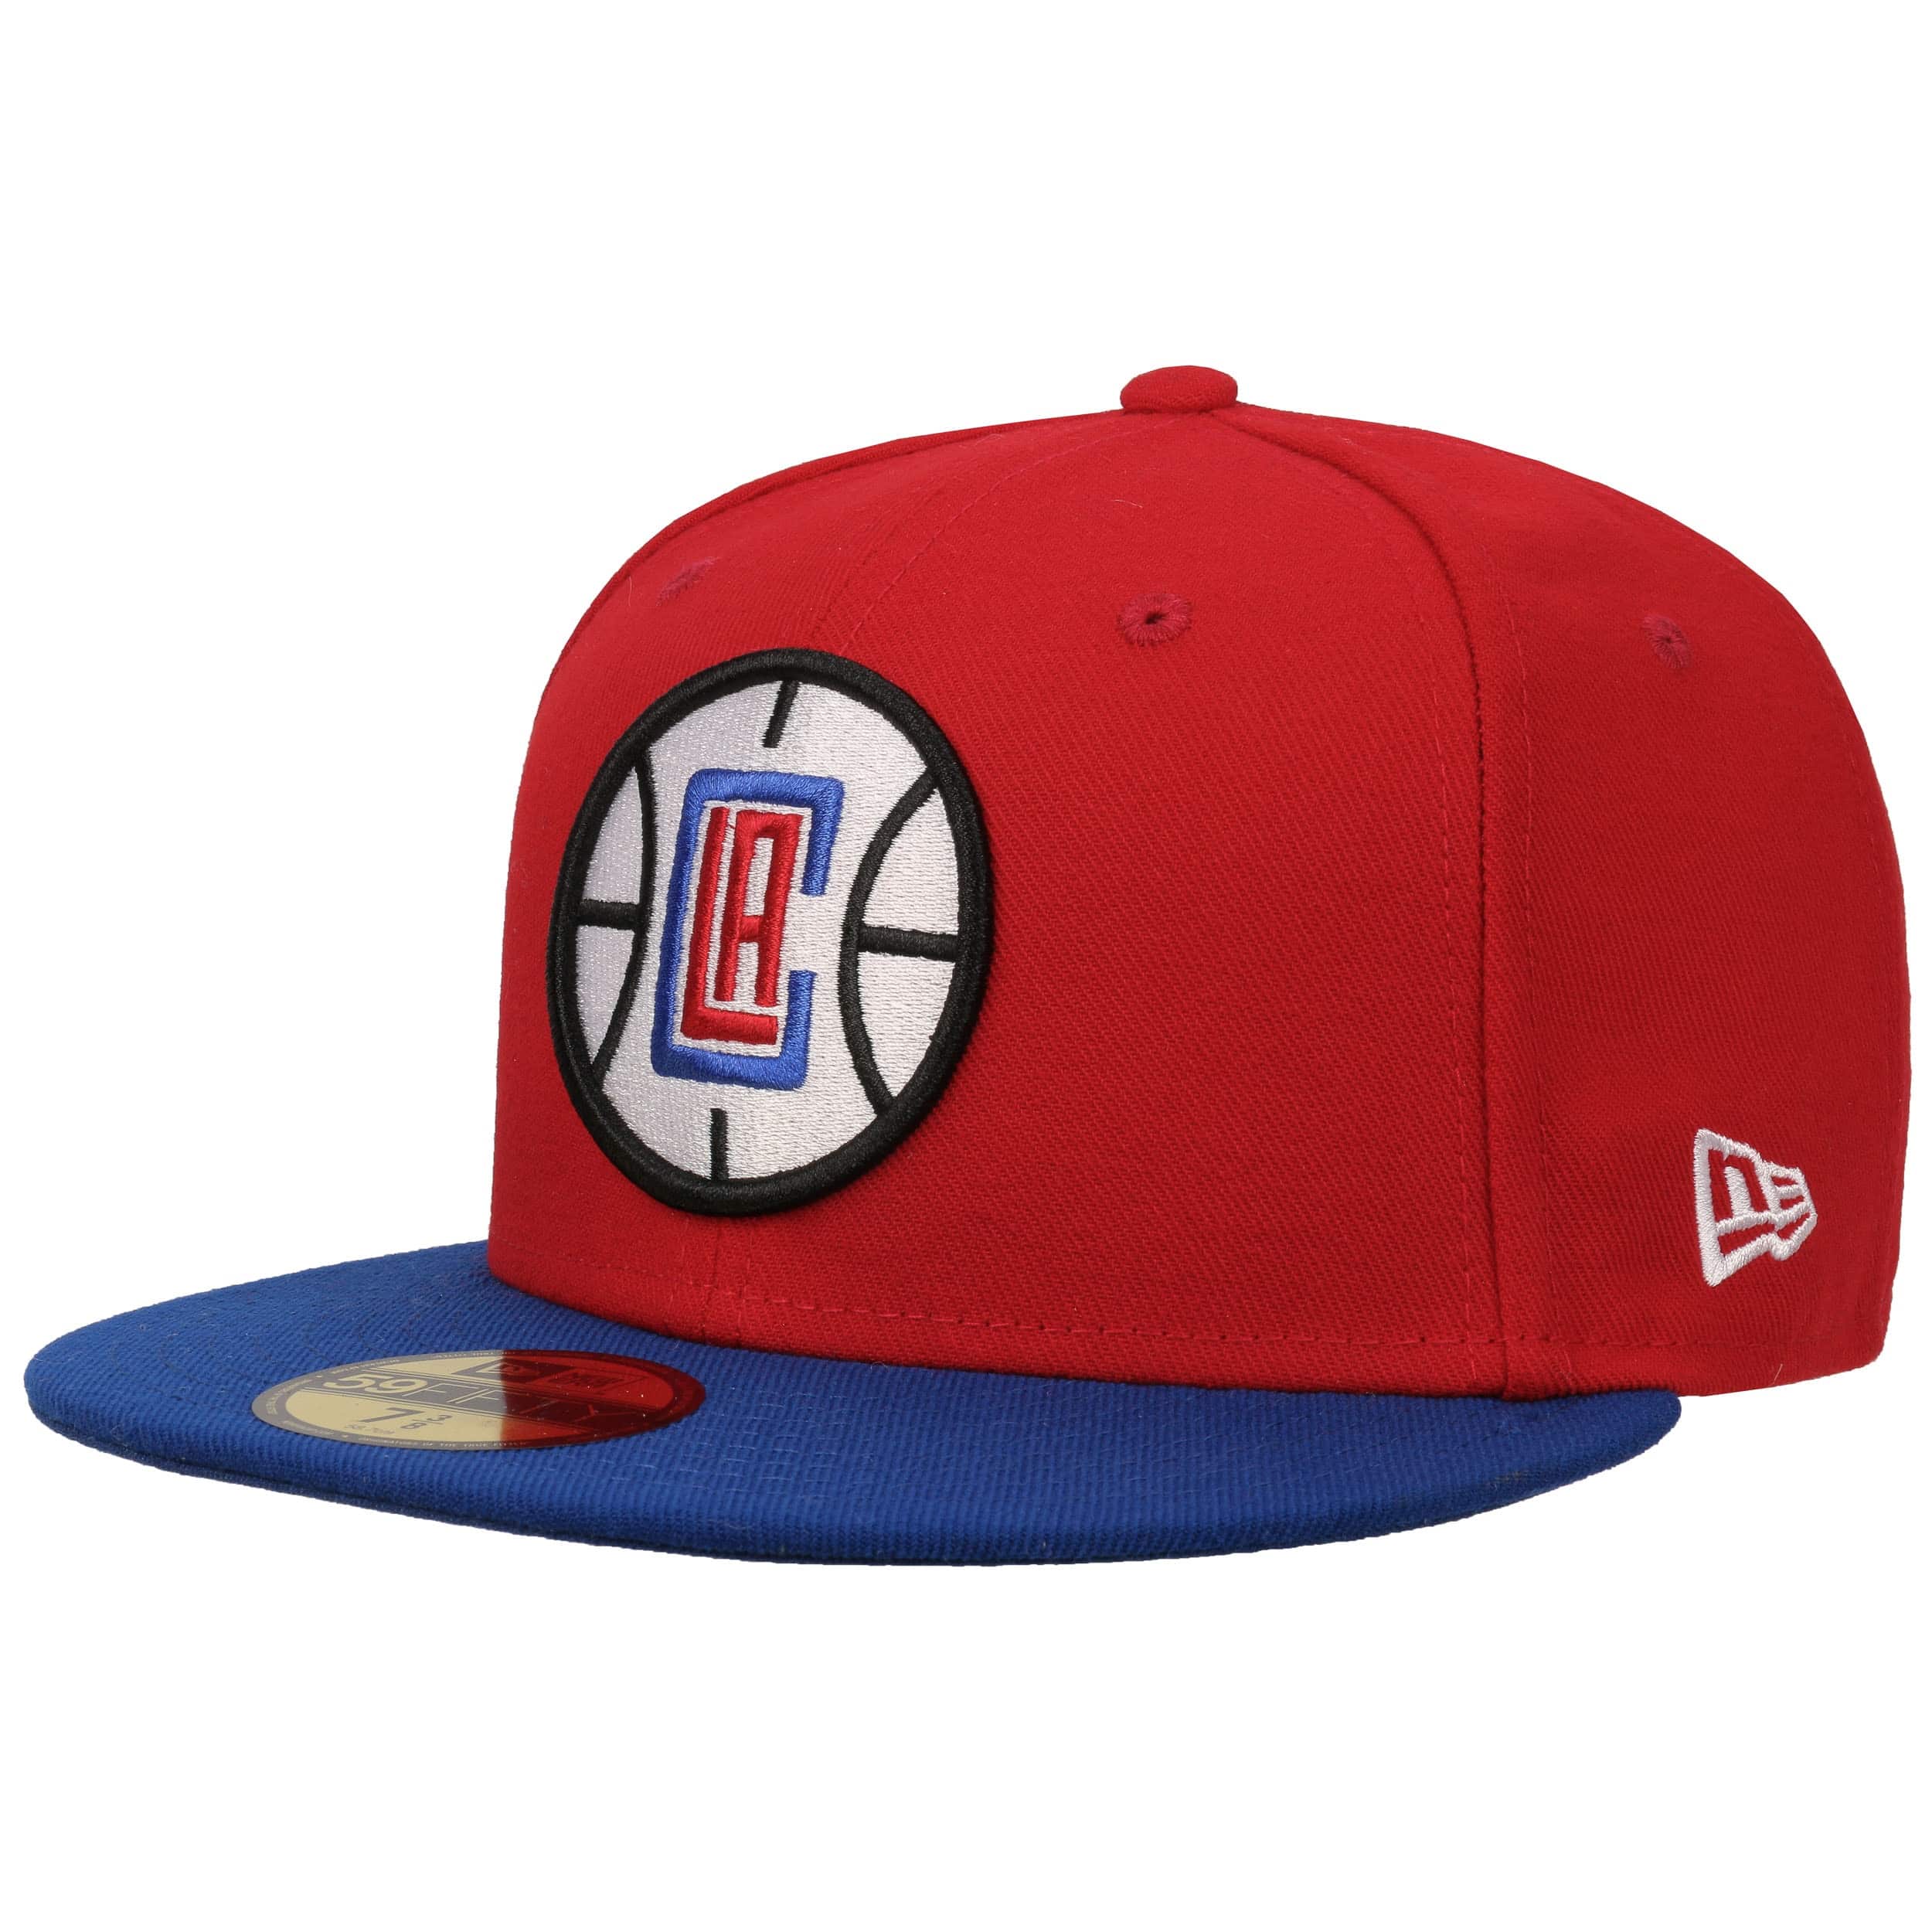 Los Angeles Clippers New Era 9 Forty cap